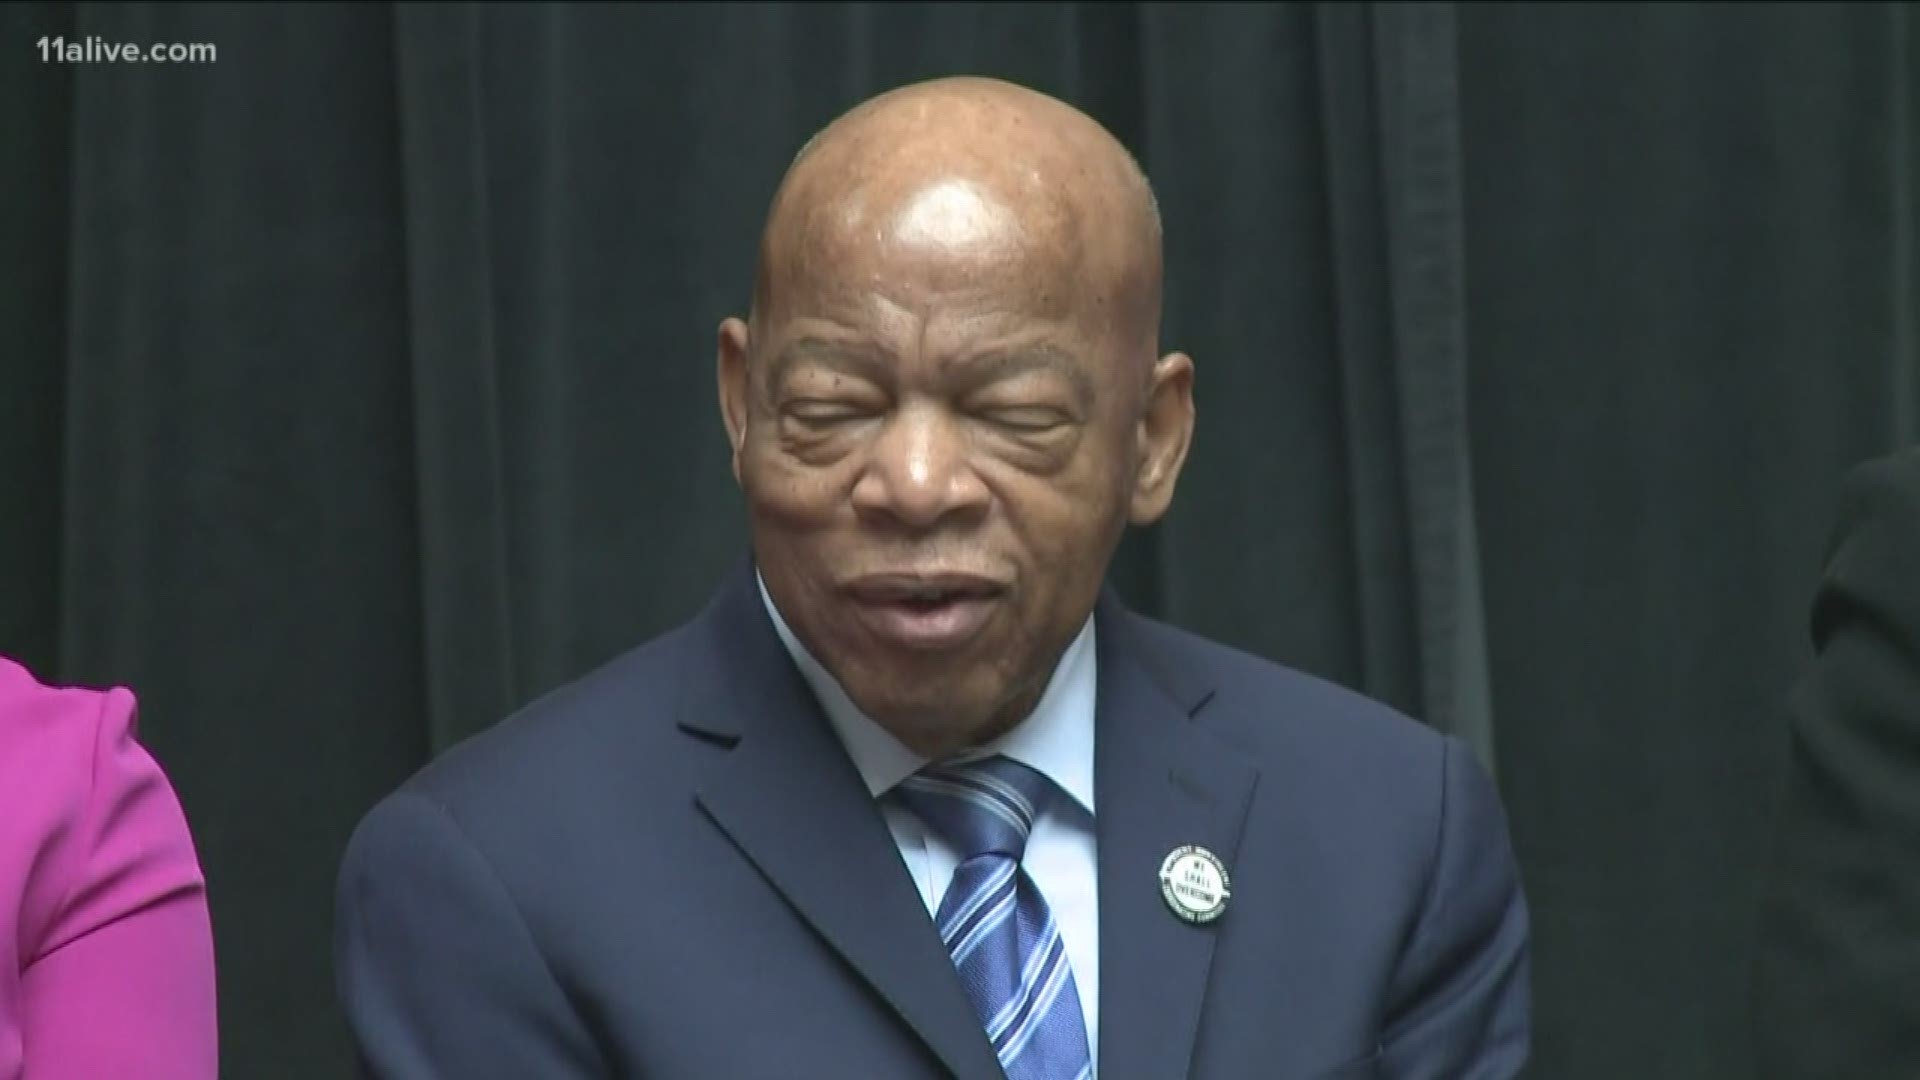 The Congressman and Civil Rights icon spoke at Framingham State in Massachusetts over the weekend.